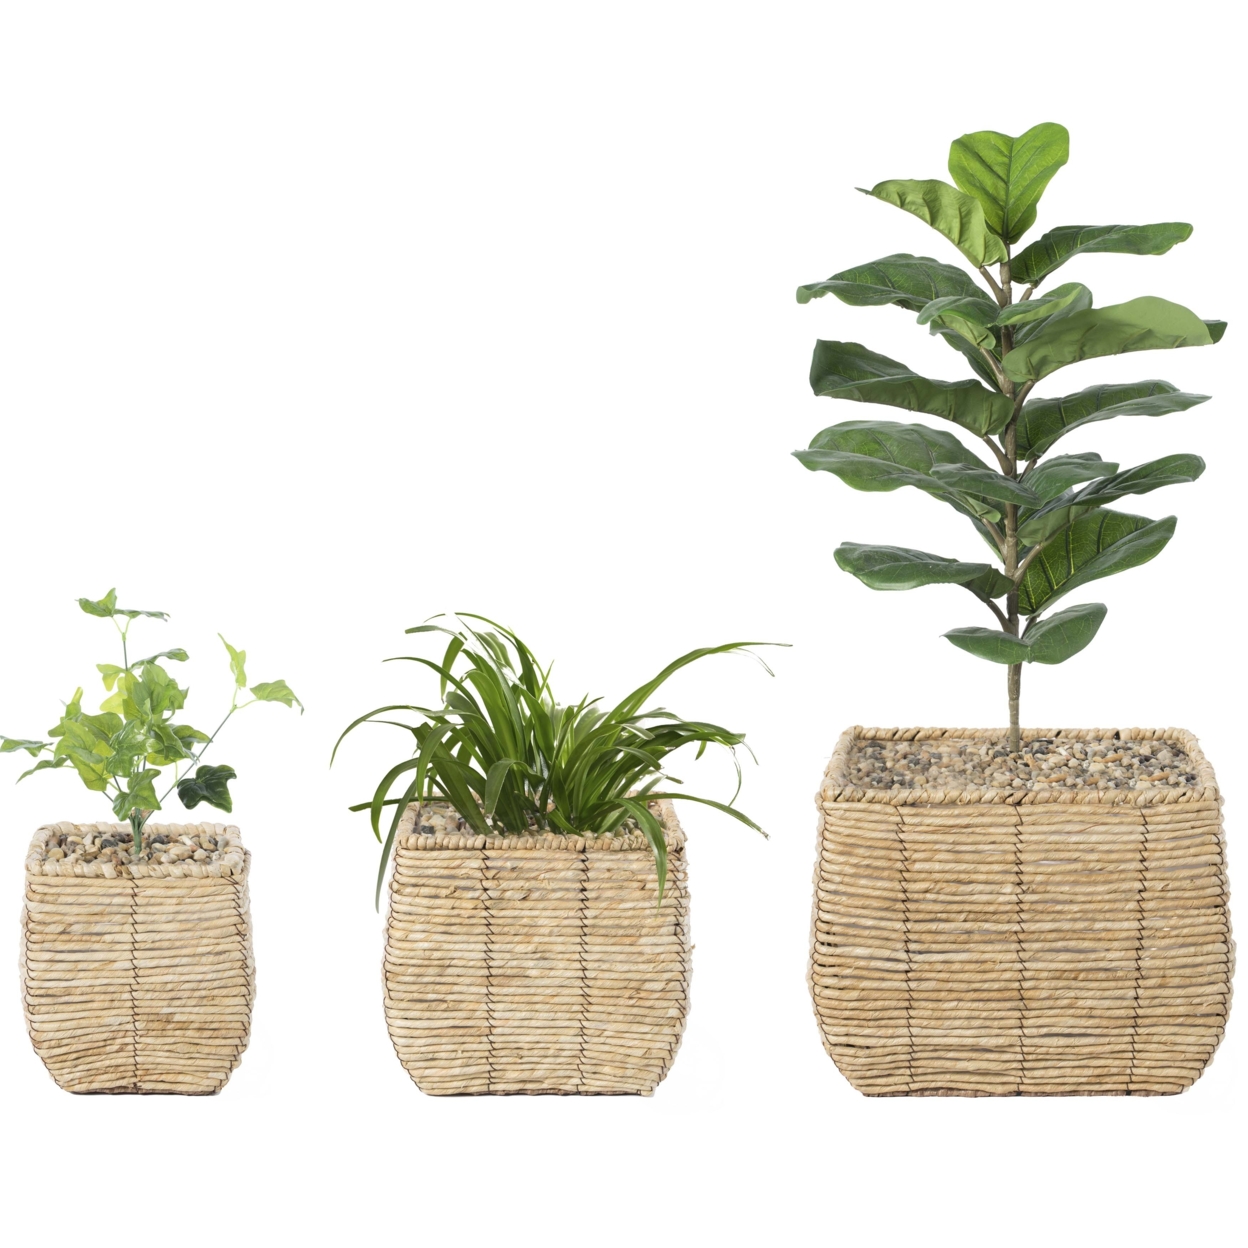 Woven Square Flower Pot Planter With Leak-Proof Plastic Lining - Set Of 3